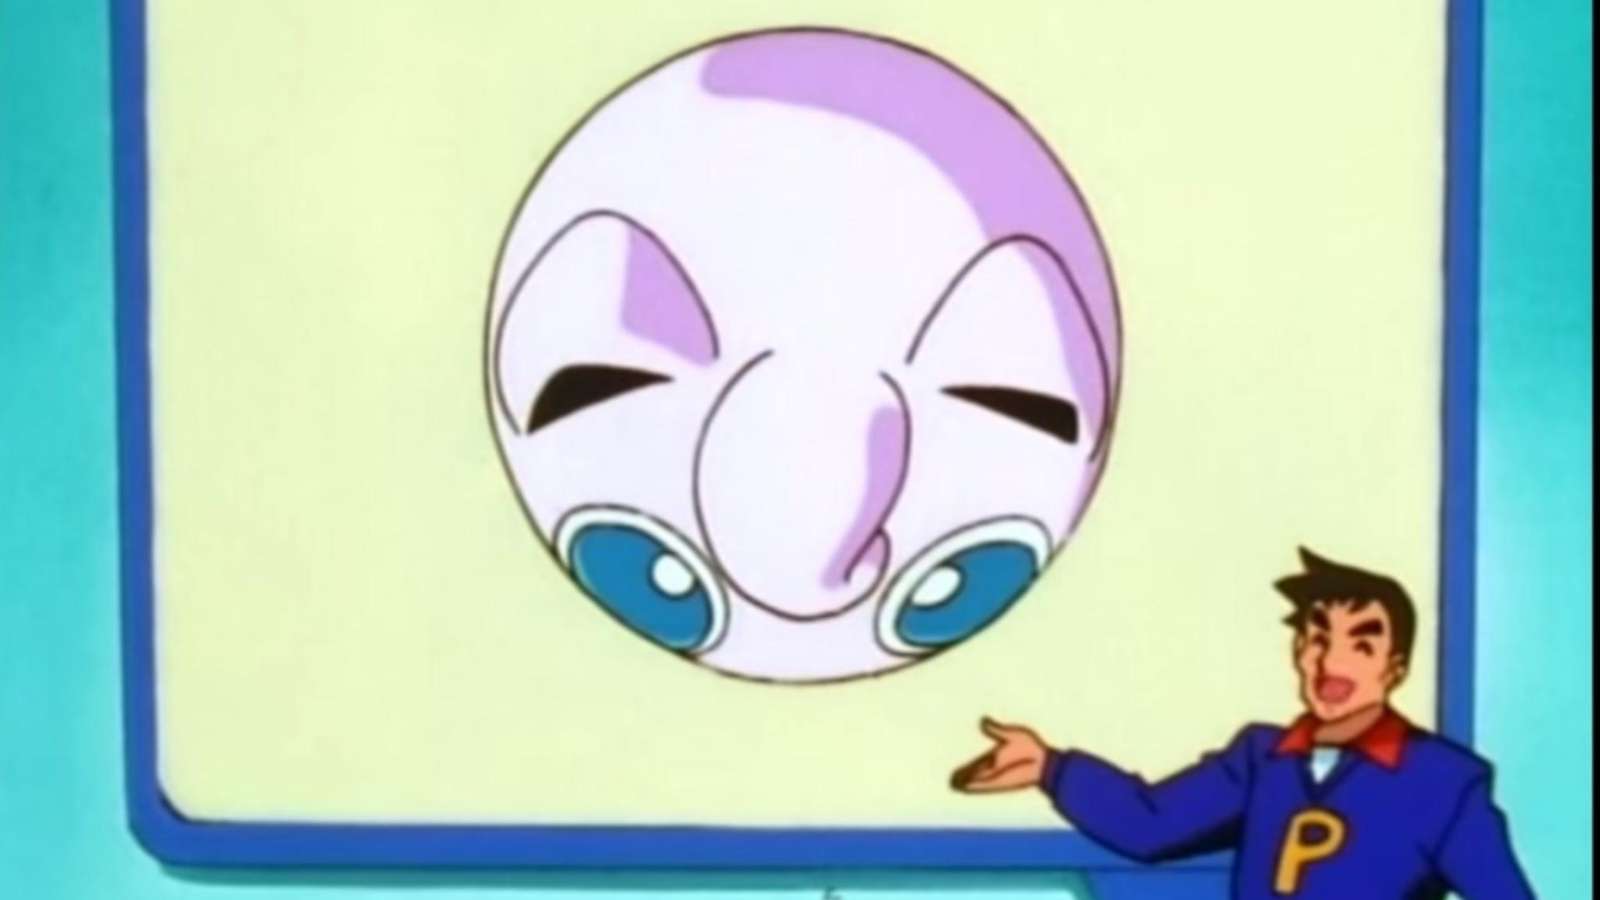 Screenshot of the famous "Jigglypuff seen from above" scene from the Pokemon anime